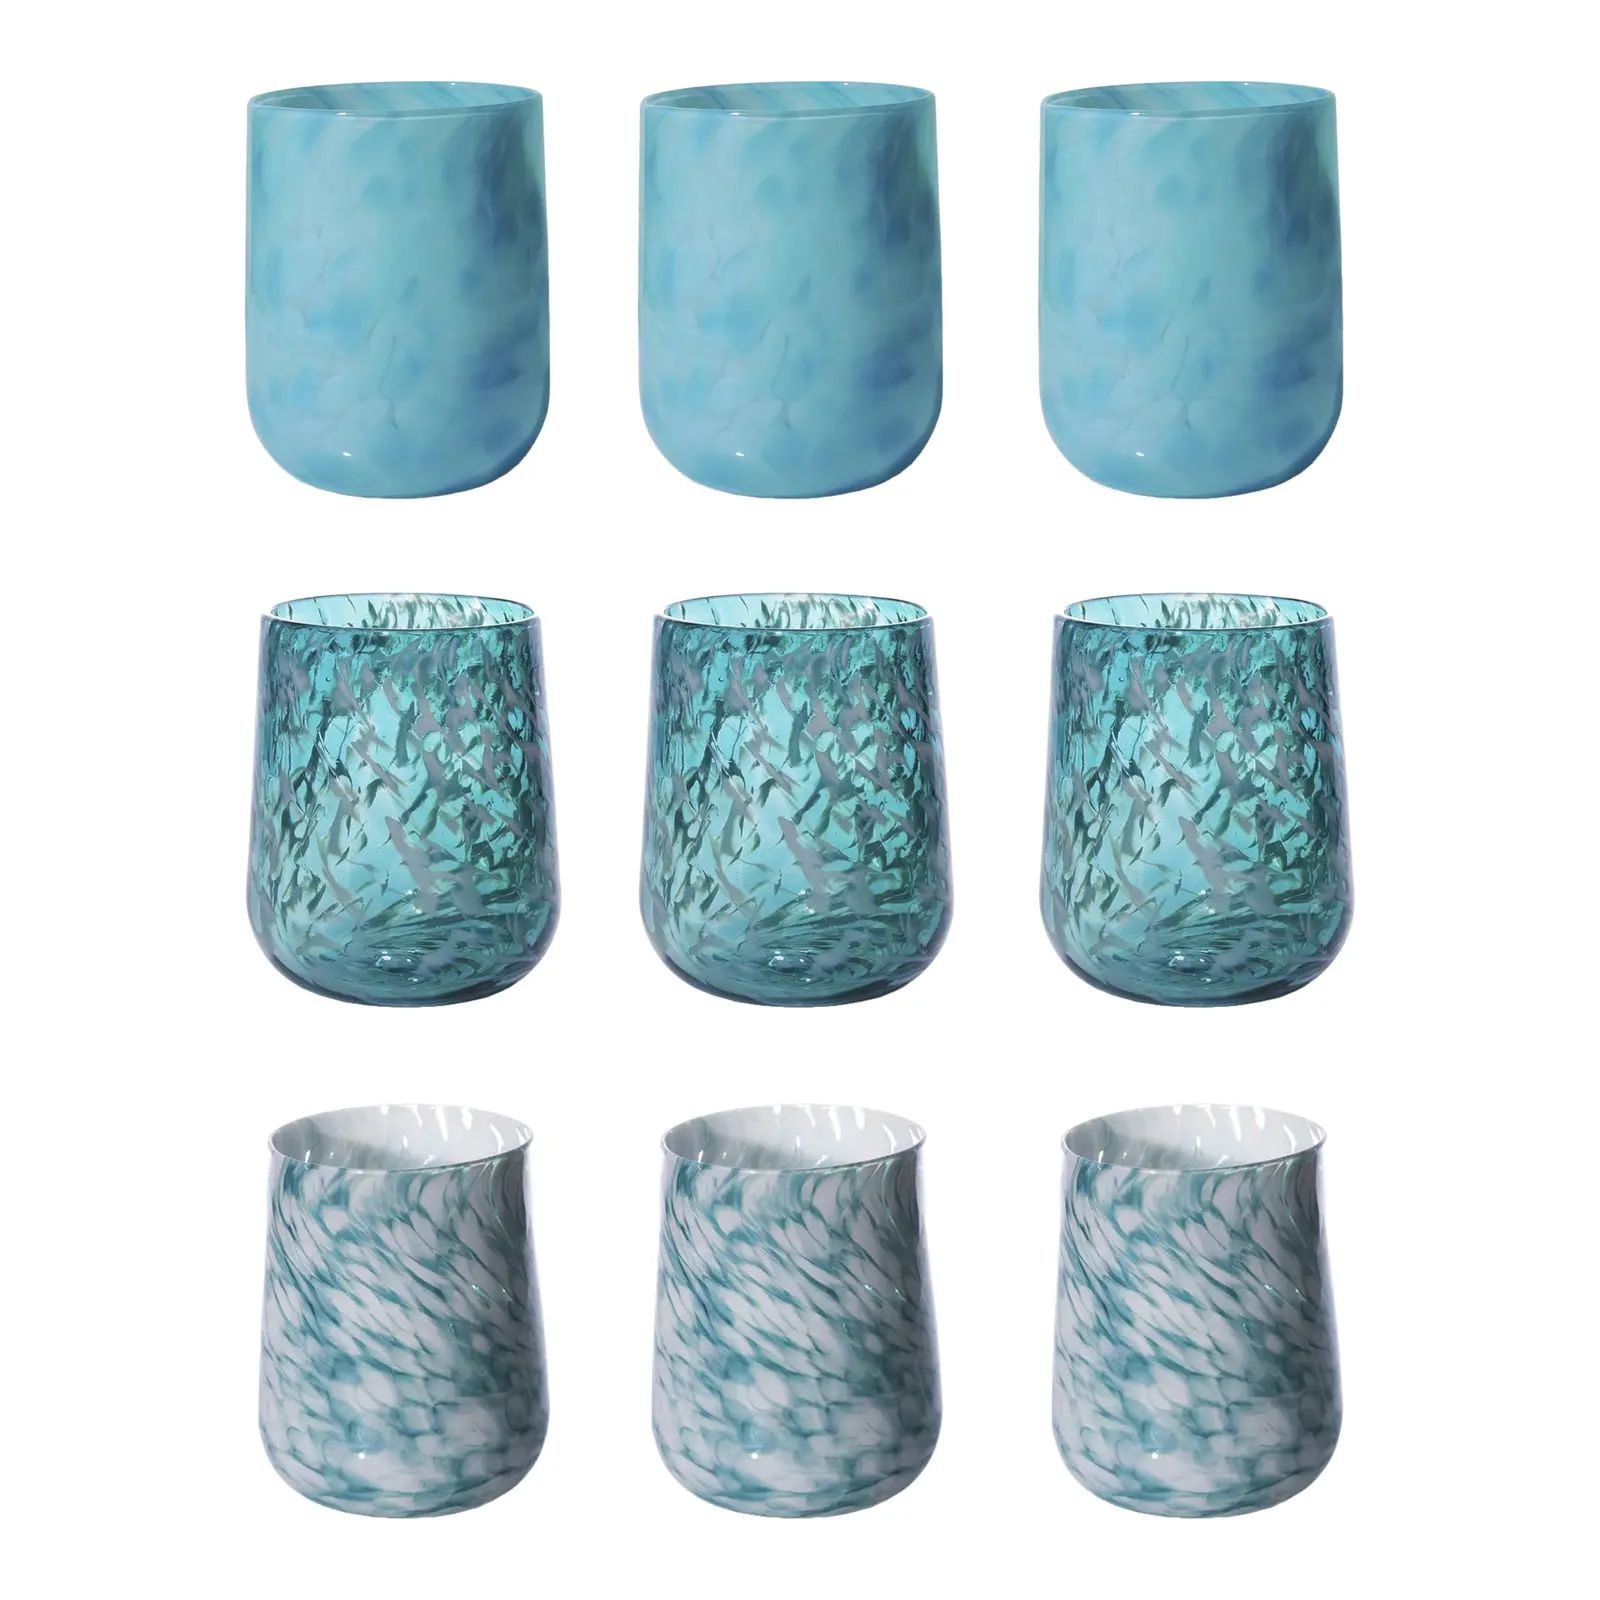 Blues & Teals Stemless Wine Glasses - Set of 9 | Chairish